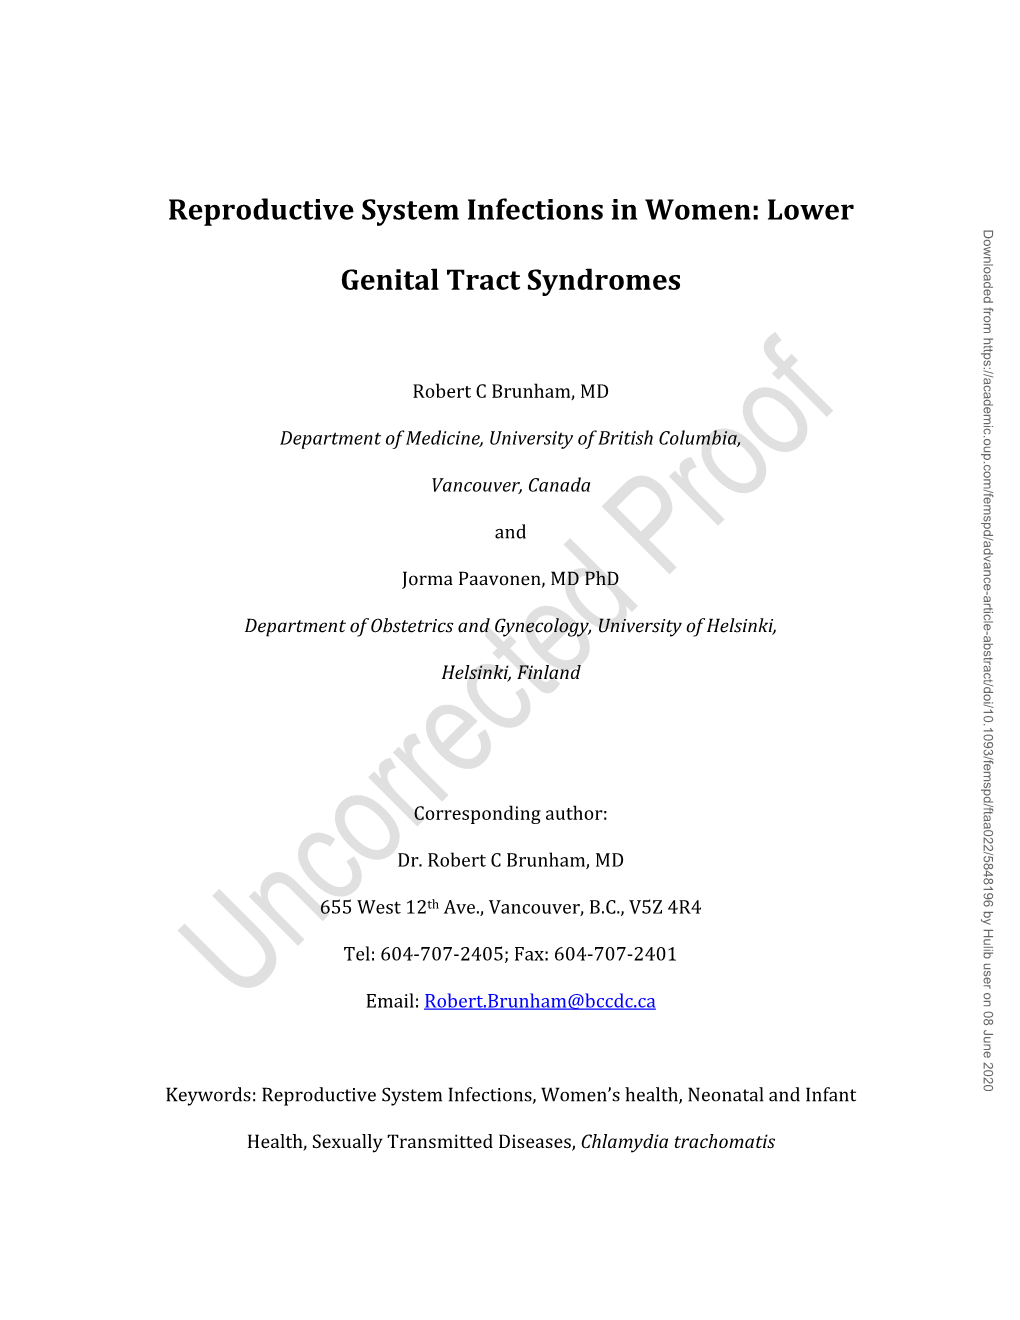 Reproductive System Infections in Women: Lower Genital Tract